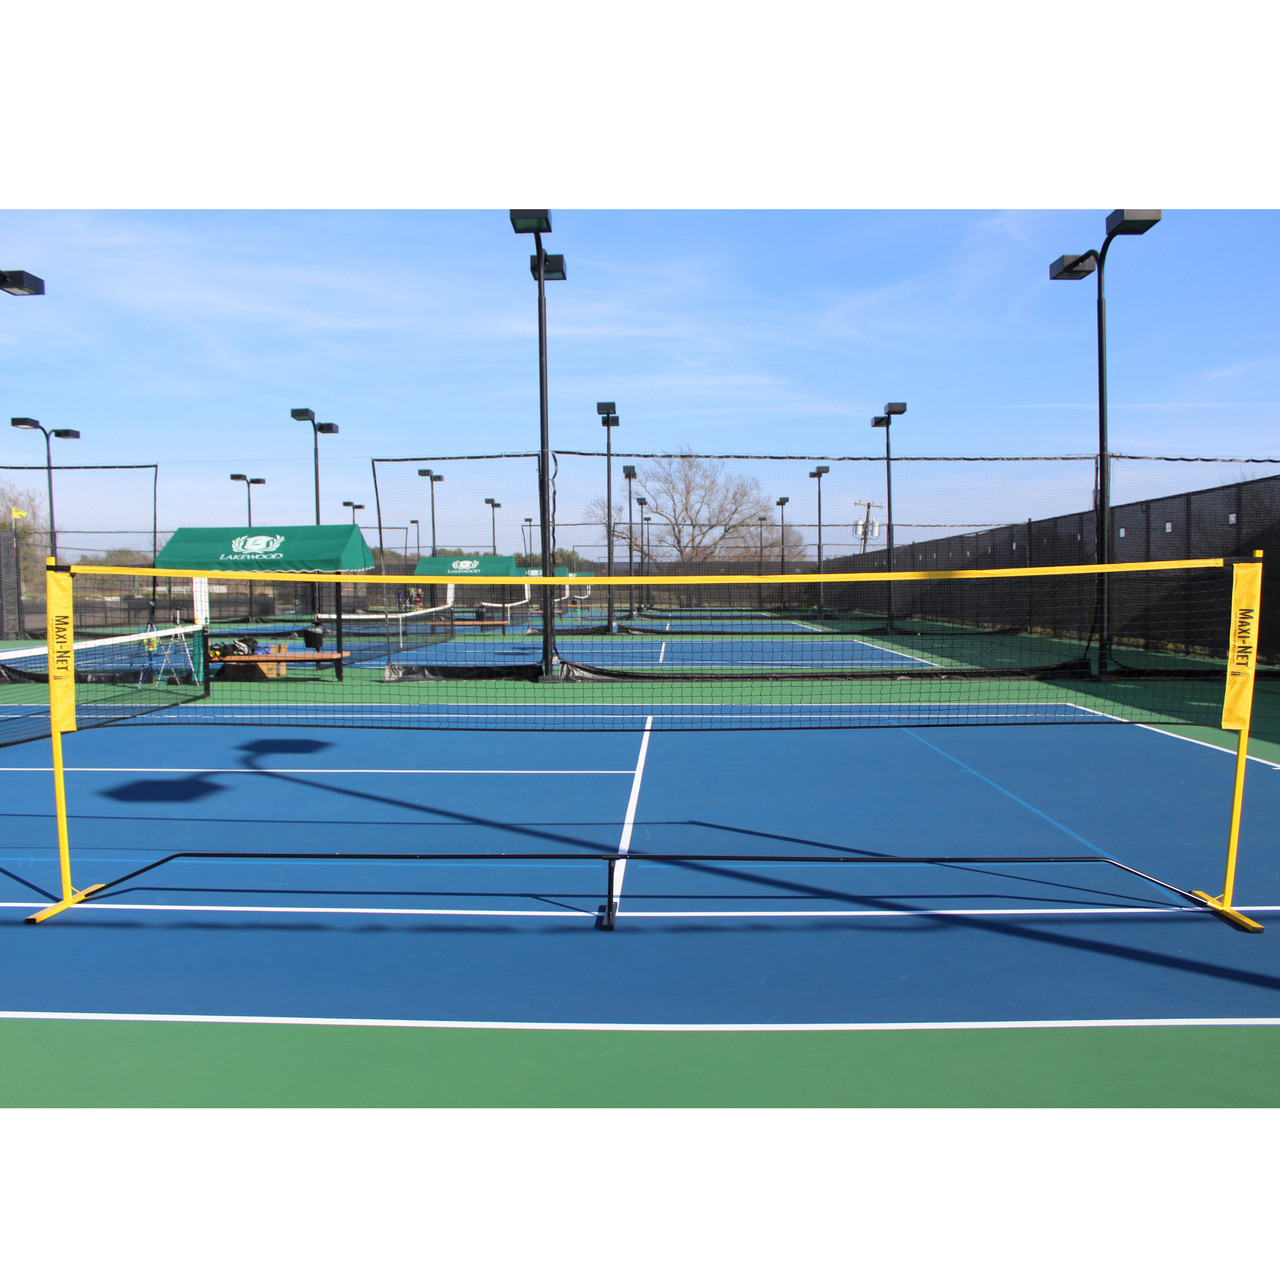 Maxi Net- 18' length with adjustable height 30" to 60" by OnCourt OffCourt includes shippingping